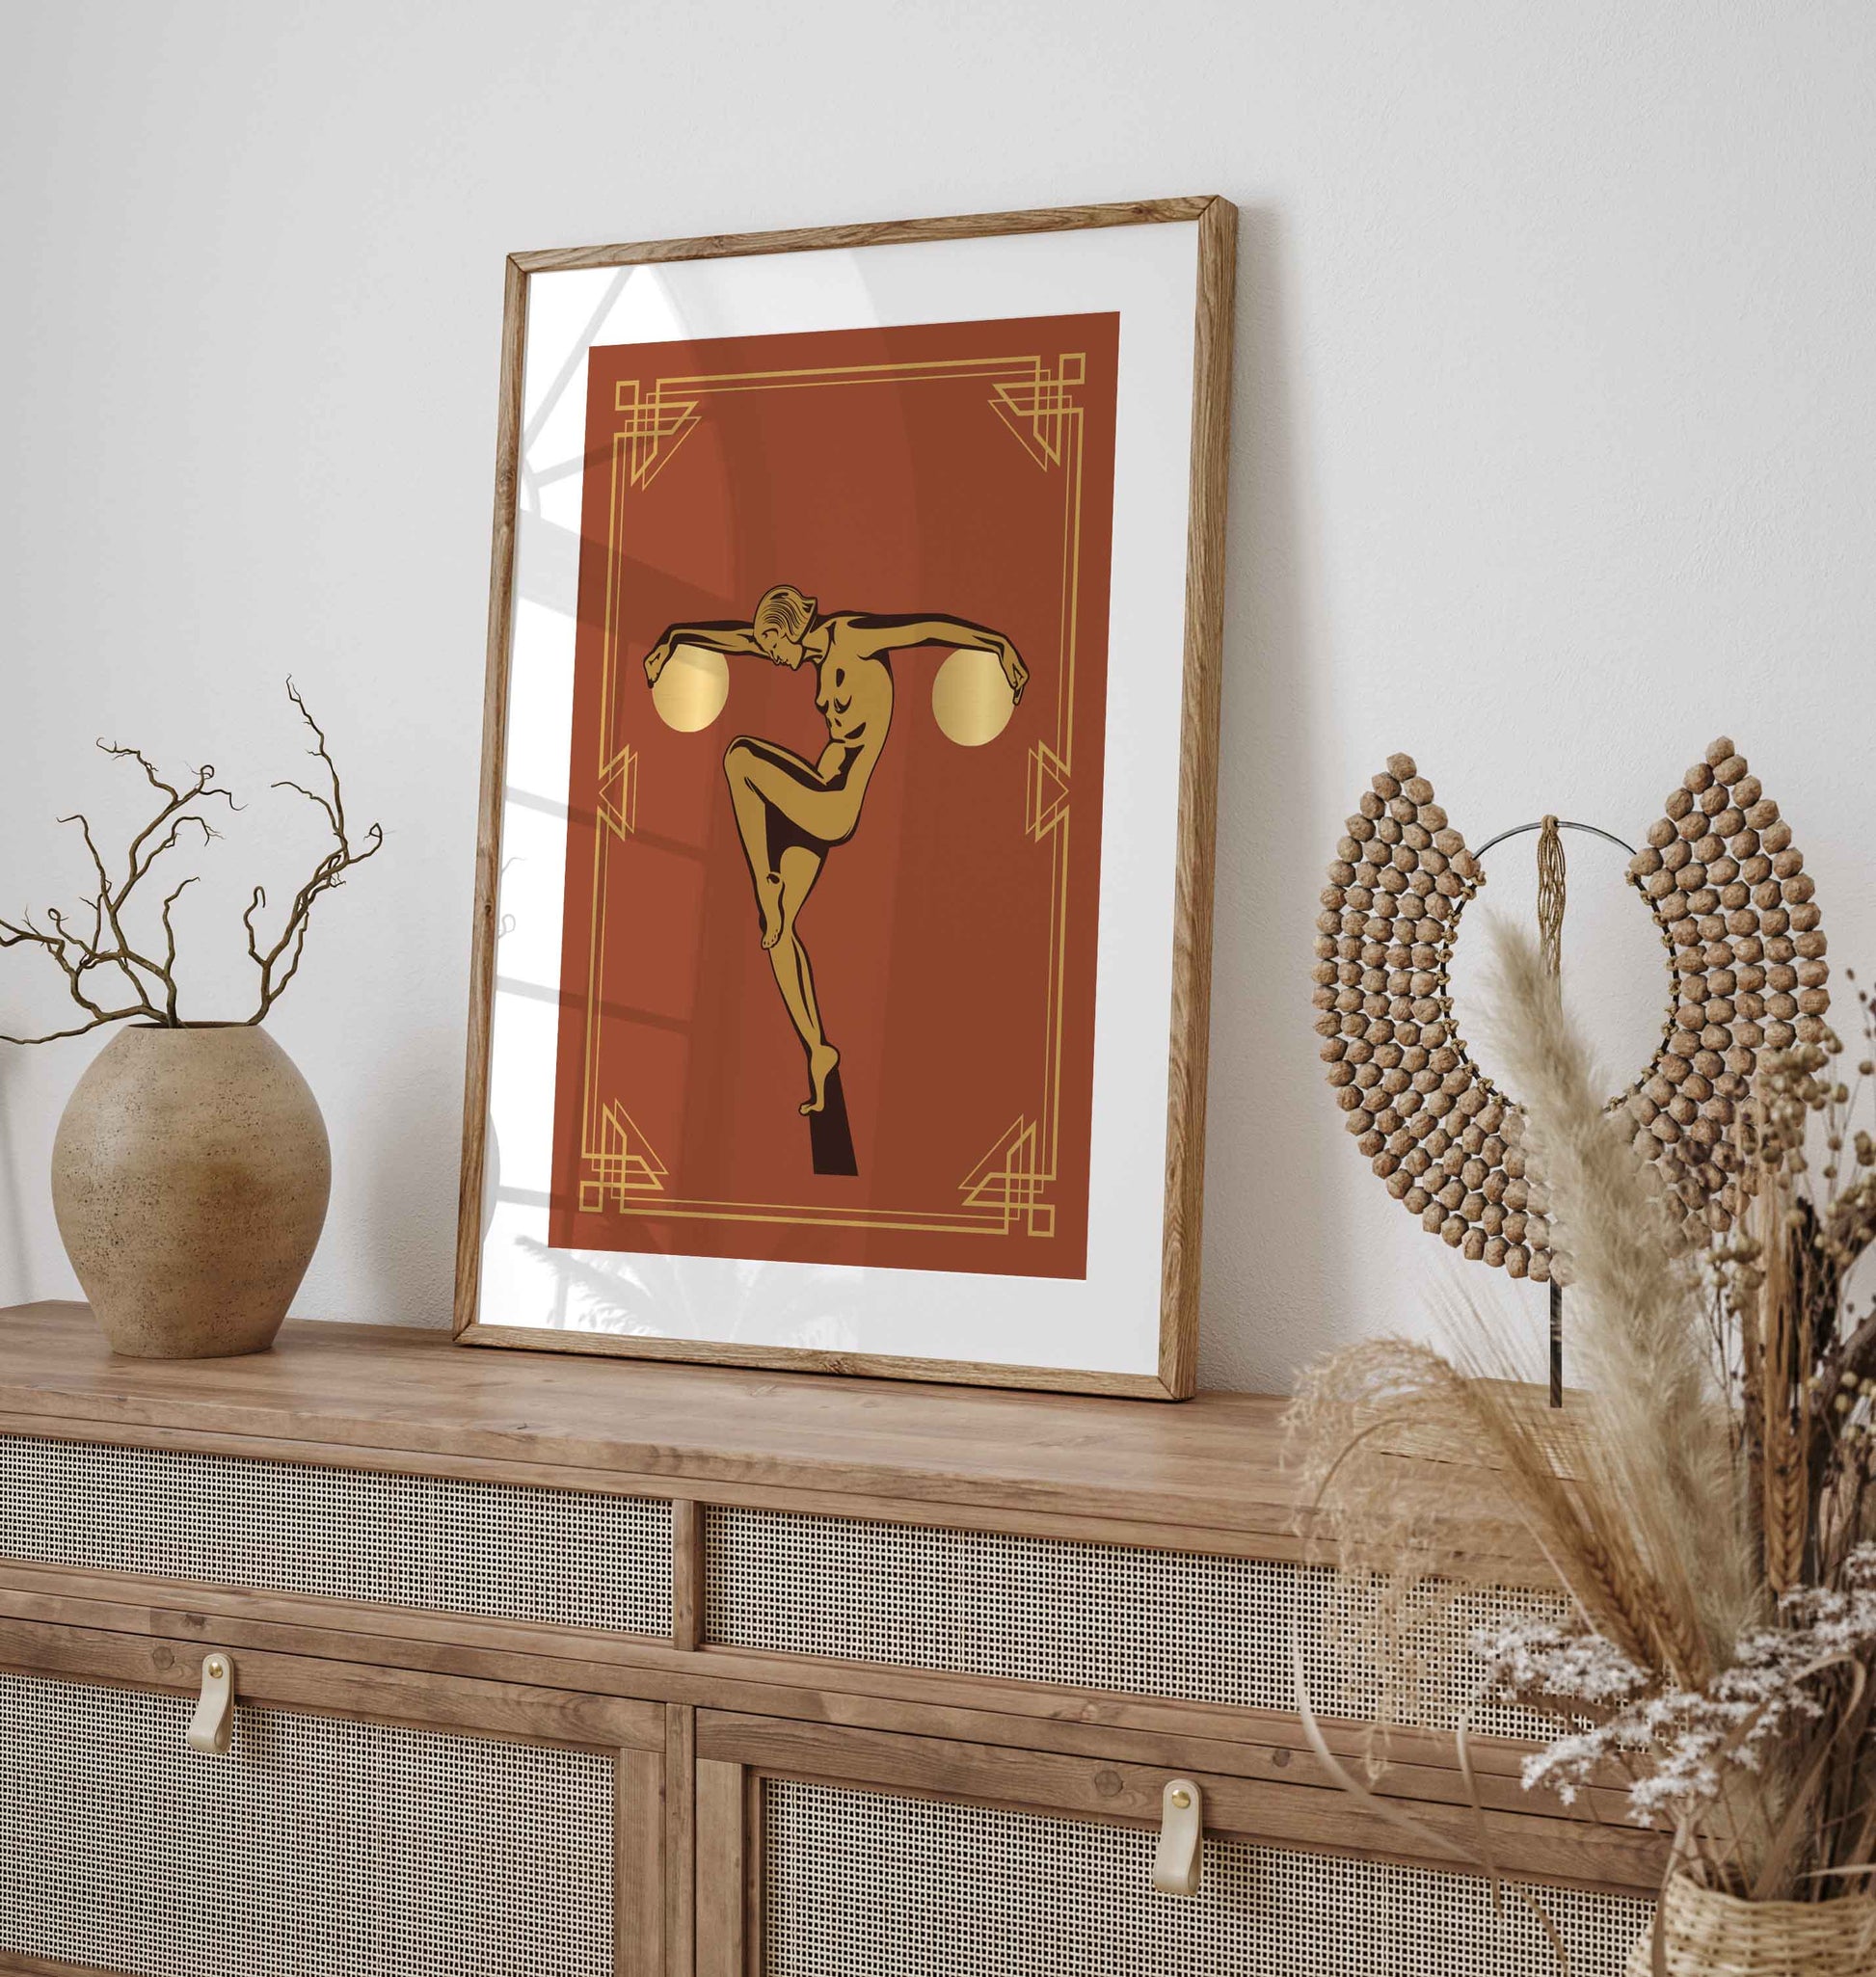 Art deco wall art print with a statue type woman holding two golden globes in orange and gold